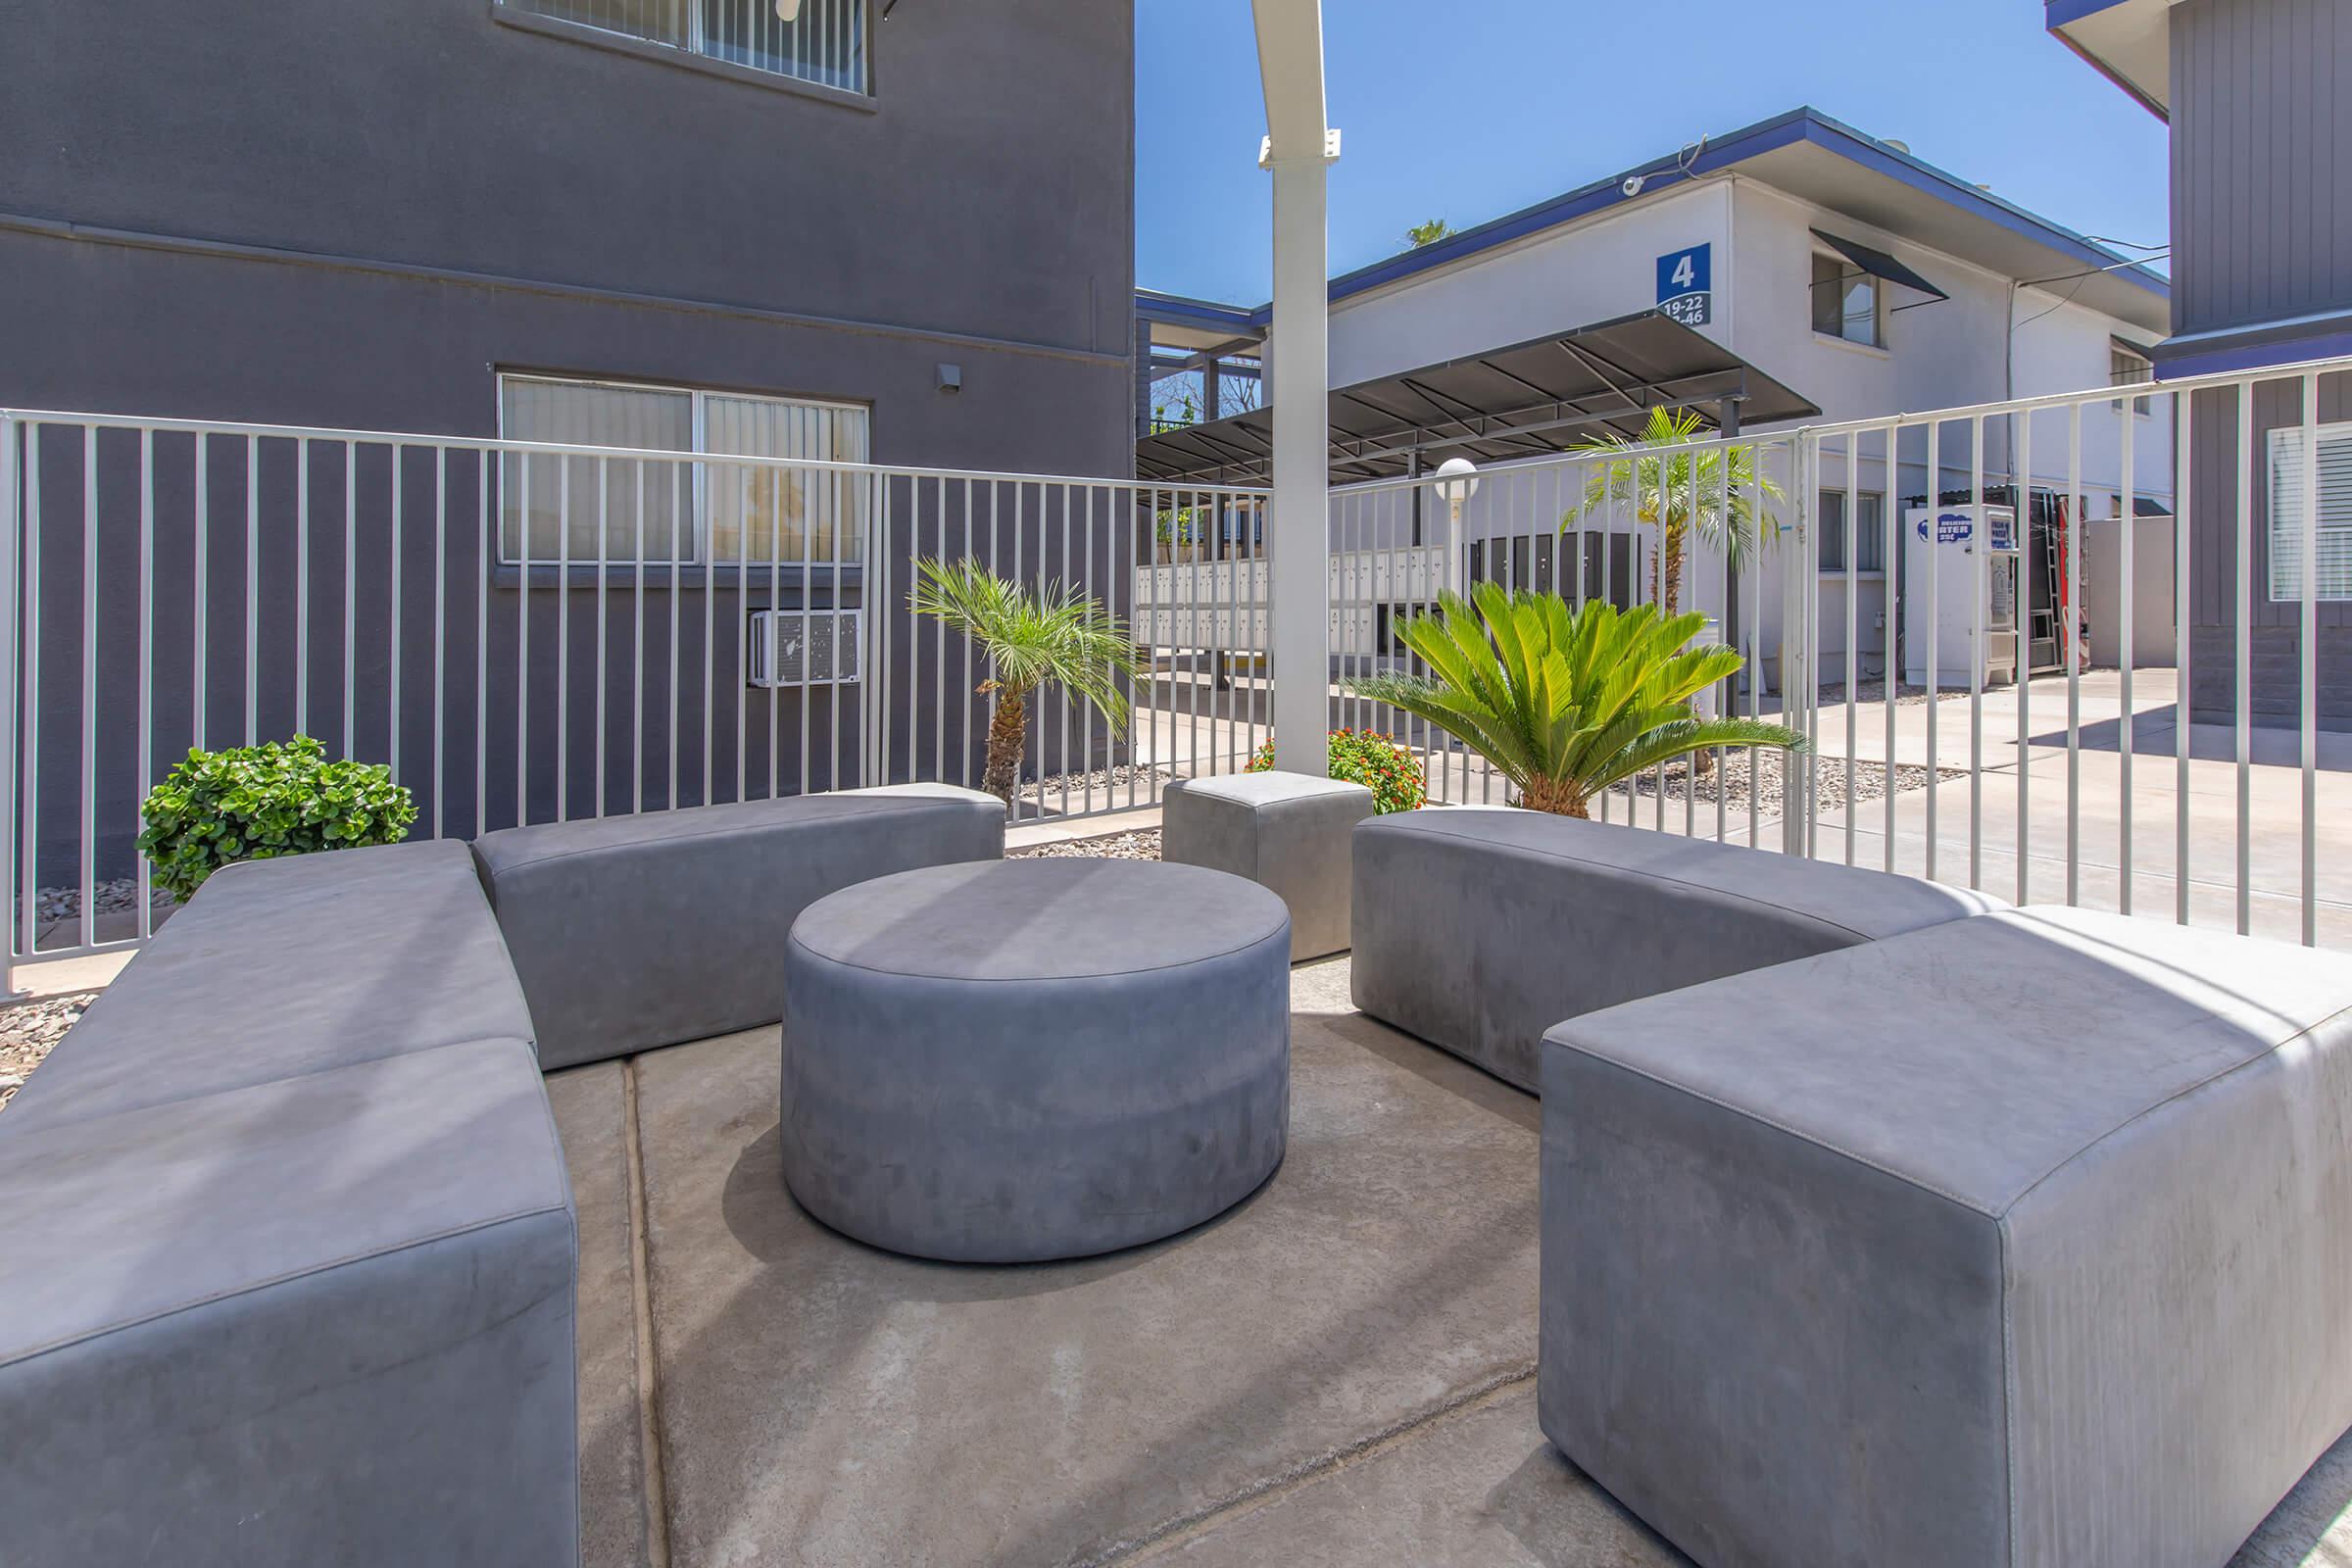 Outdoor sitting area surrounded by plants and a large white fence with Phoenix apartments in the back